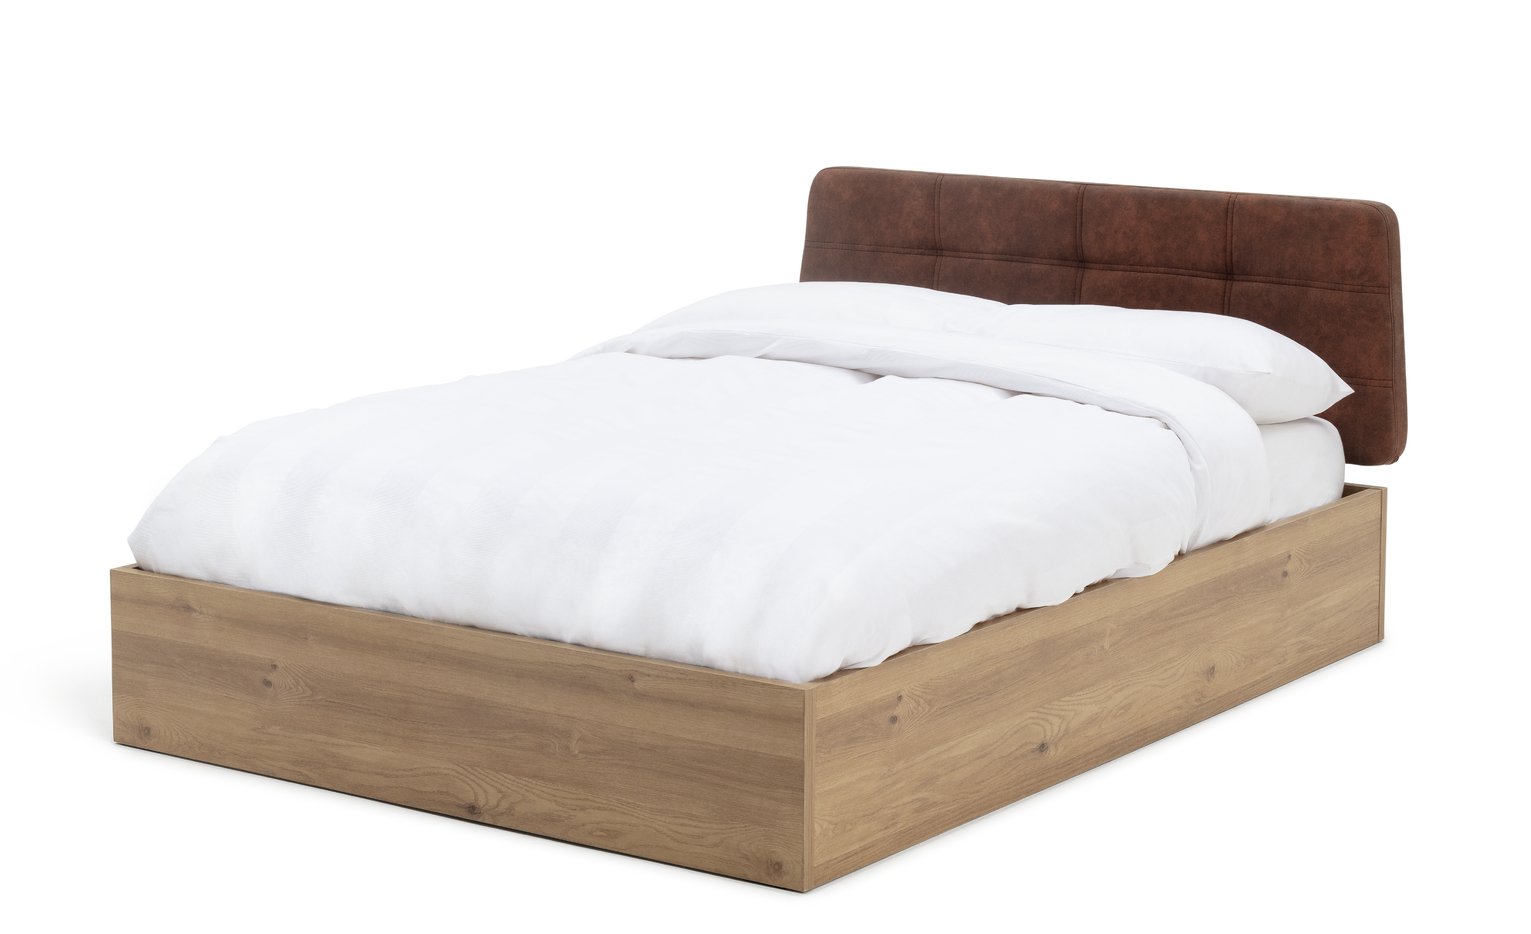 Argos Home Tribeca Ottoman Double Bed Frame Review